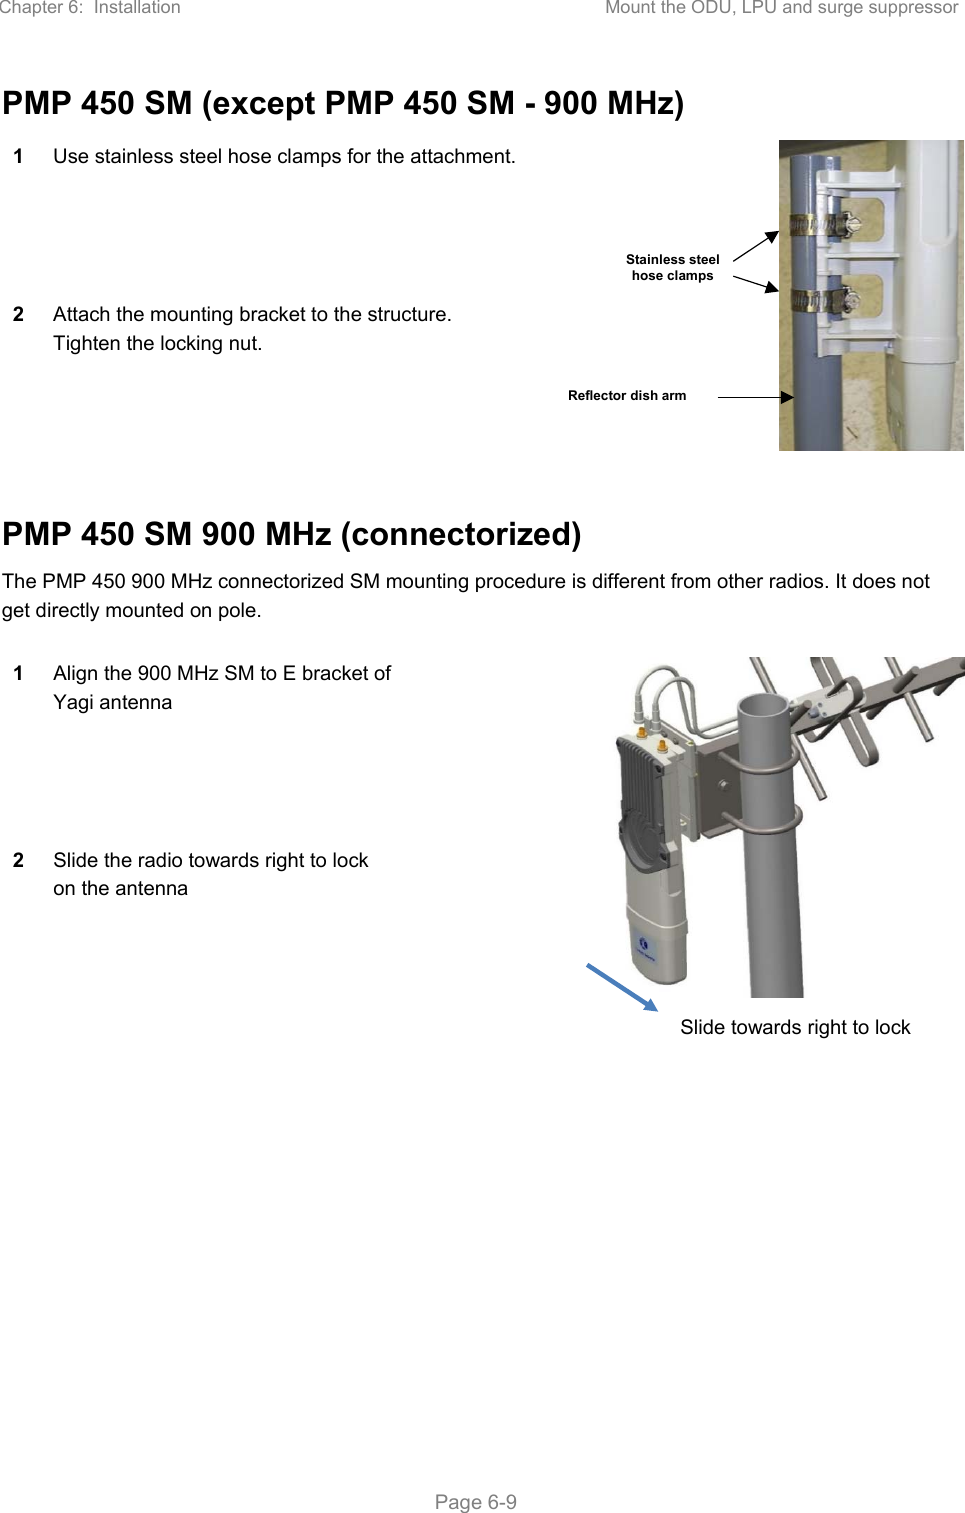 Chapter 6:  Installation  Mount the ODU, LPU and surge suppressor   Page 6-9 PMP 450 SM (except PMP 450 SM - 900 MHz) 1  Use stainless steel hose clamps for the attachment. 2  Attach the mounting bracket to the structure. Tighten the locking nut.  PMP 450 SM 900 MHz (connectorized) The PMP 450 900 MHz connectorized SM mounting procedure is different from other radios. It does not get directly mounted on pole.   1  Align the 900 MHz SM to E bracket of Yagi antenna 2  Slide the radio towards right to lock on the antenna Stainless steel hose clamps Reflector dish arm Slide towards right to lock 